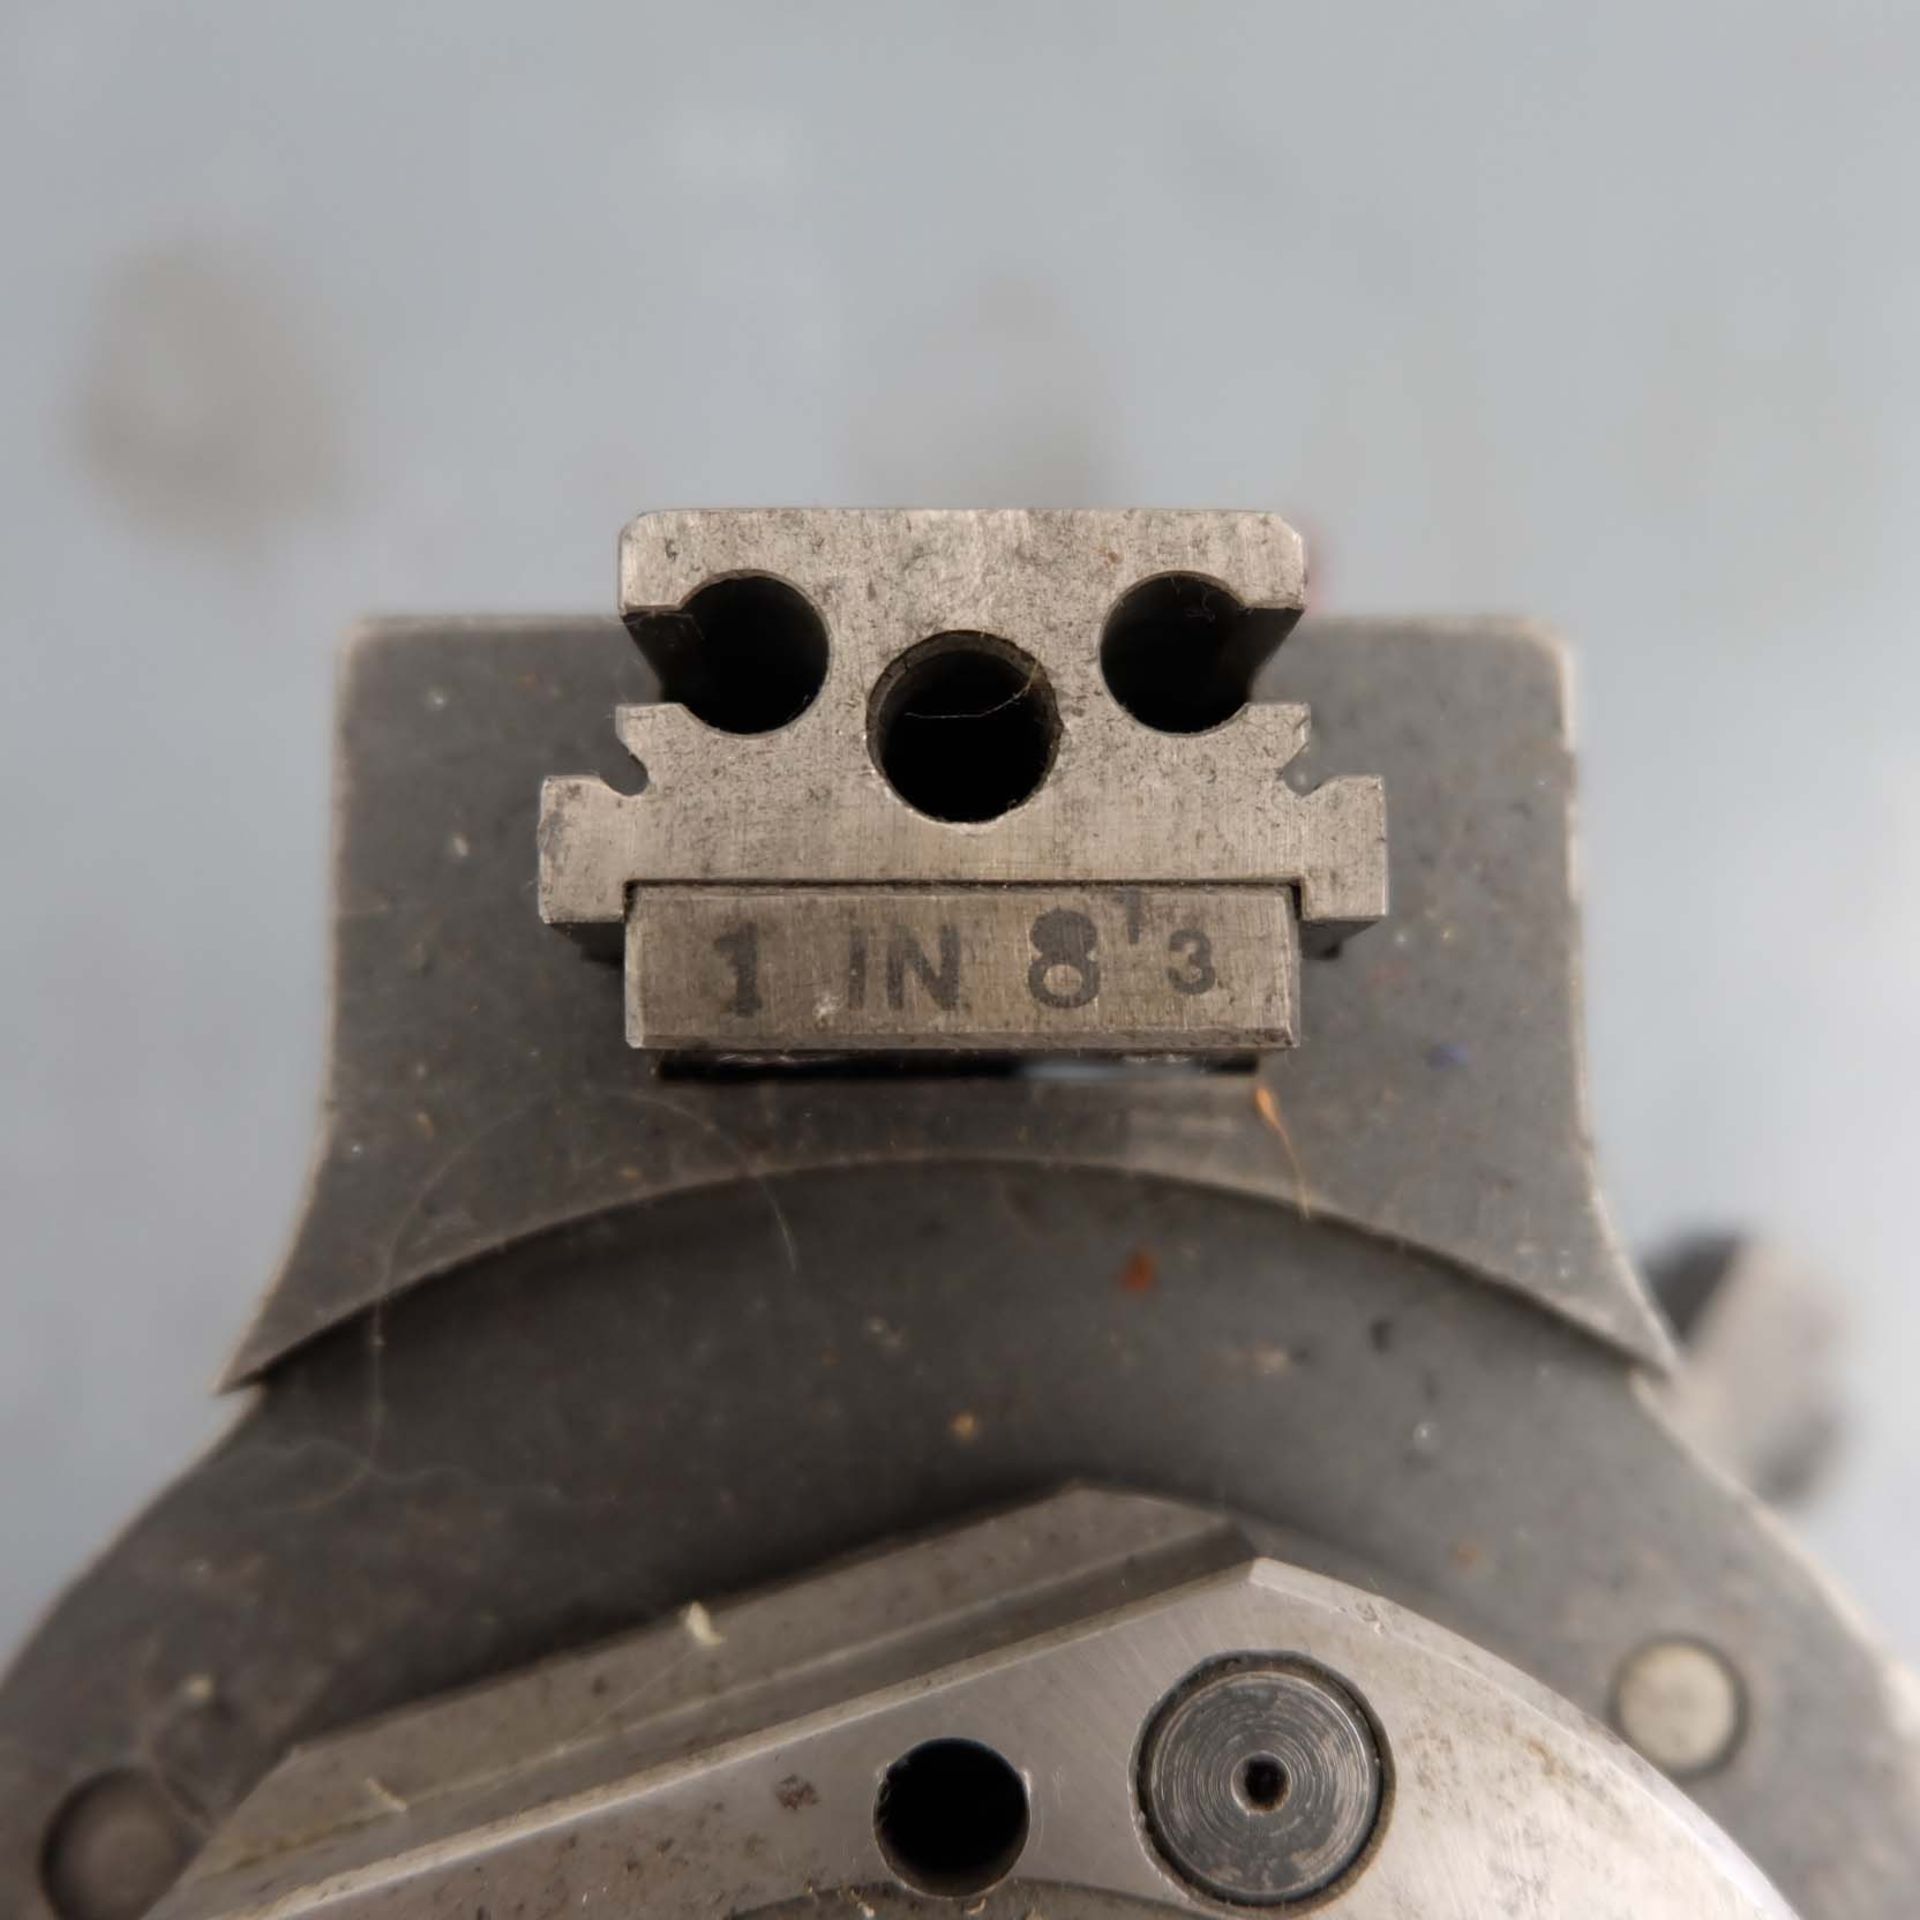 Hampson 1 1/4" CHS Coventry Die Head. With Taper Threading Attachment. Spigot Size 2 1/8" Diameter. - Image 5 of 6